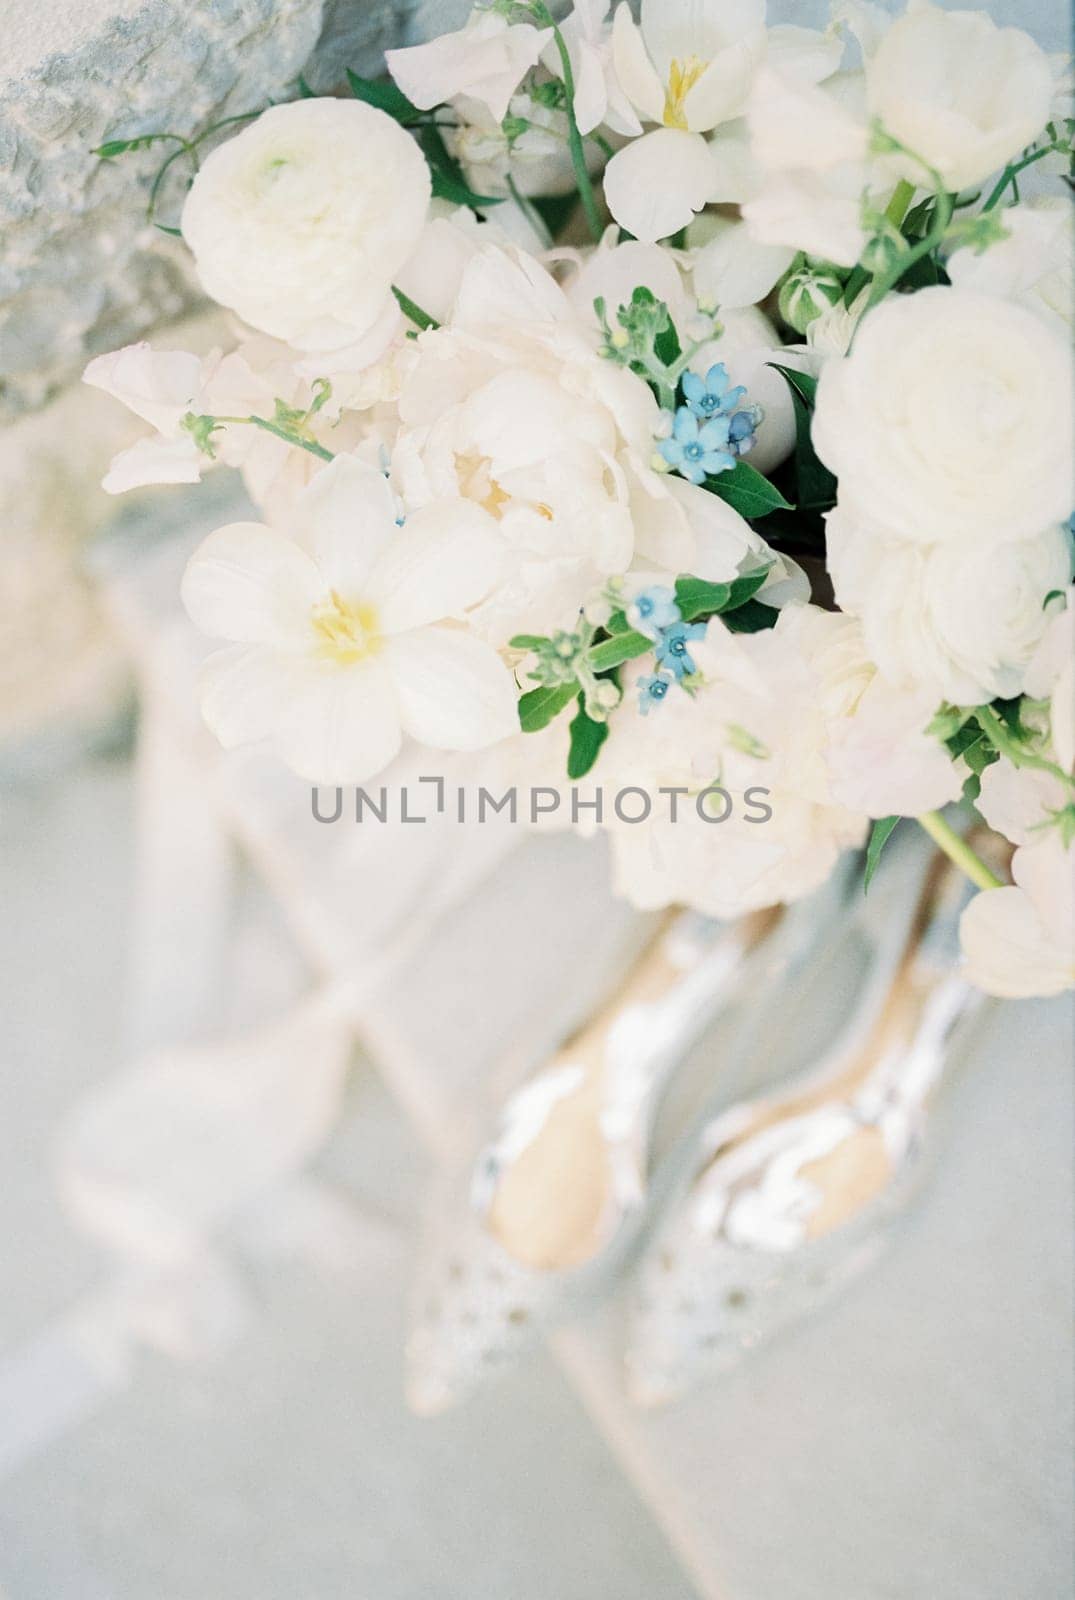 Wedding bouquet stands on the table near bride shoes. Top view by Nadtochiy